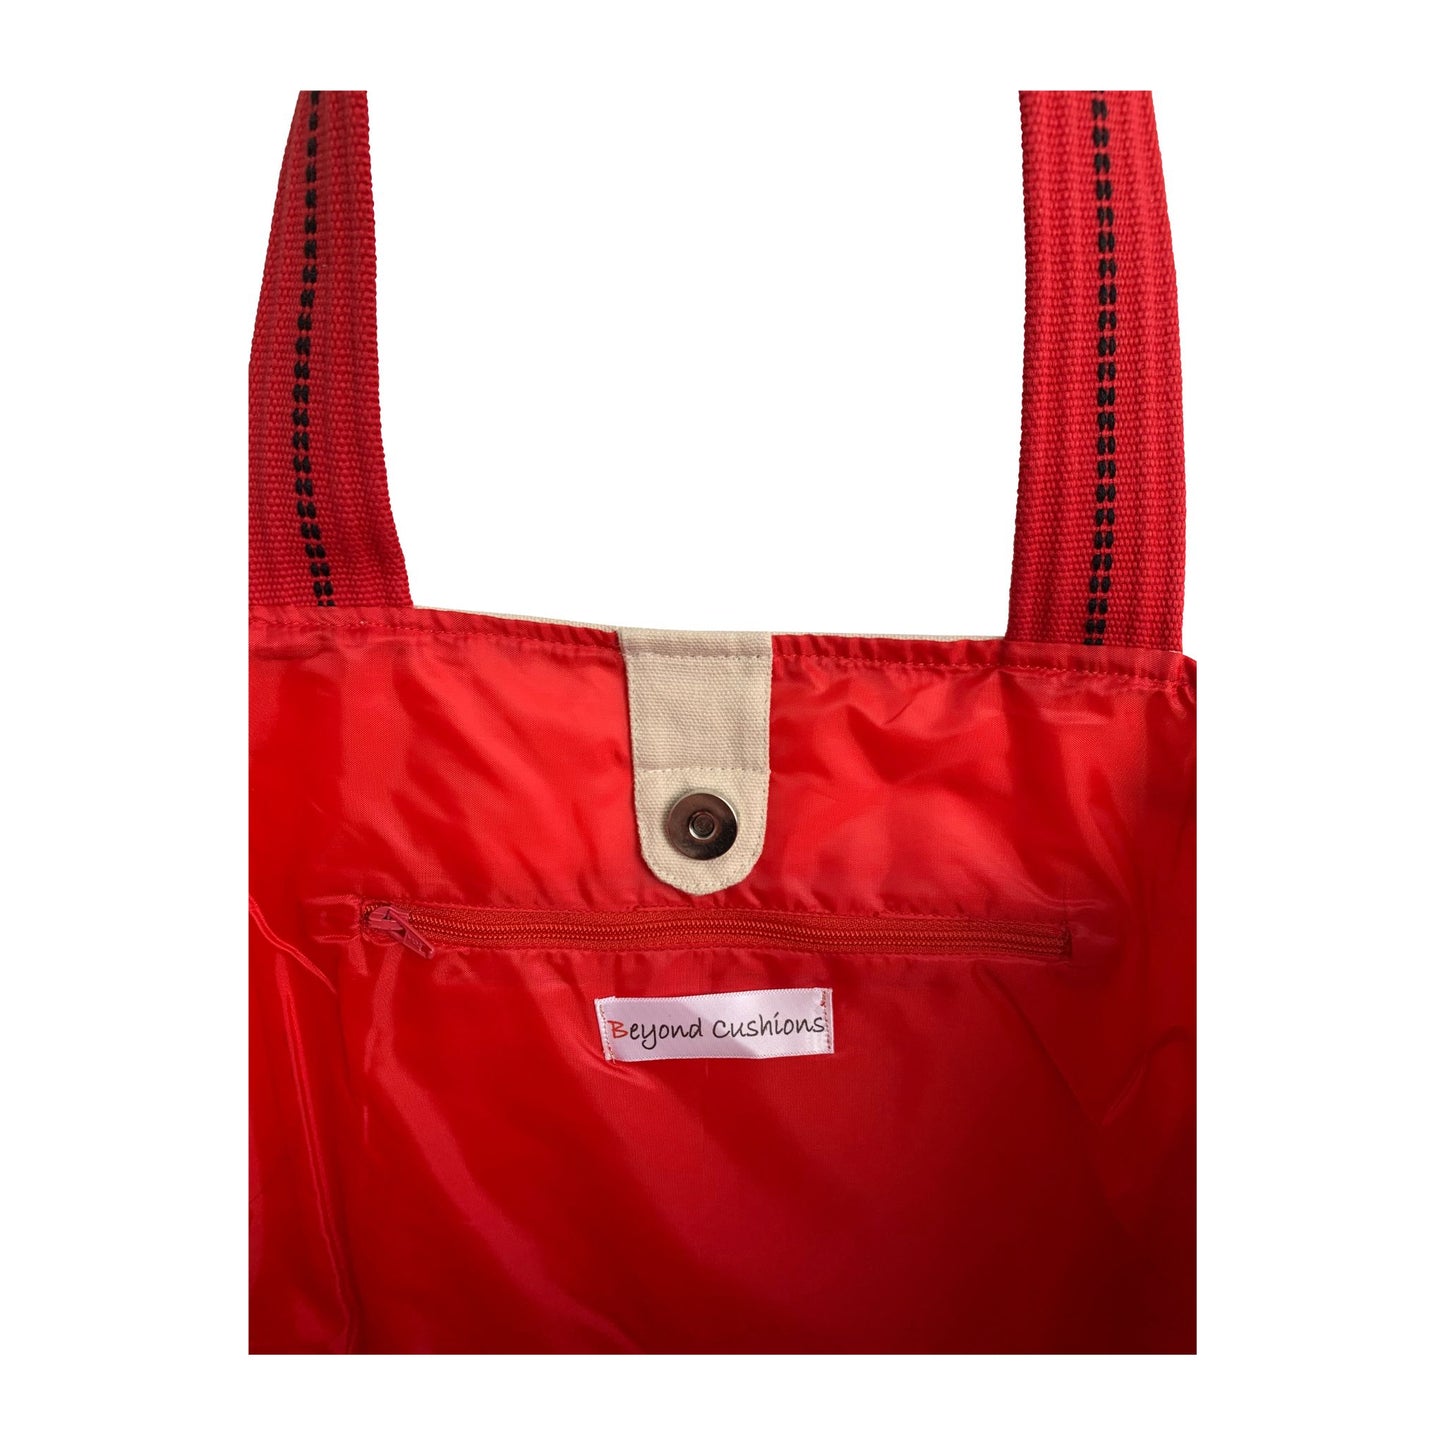 Embroidered City Artistry Collection Tote Bag - Rome